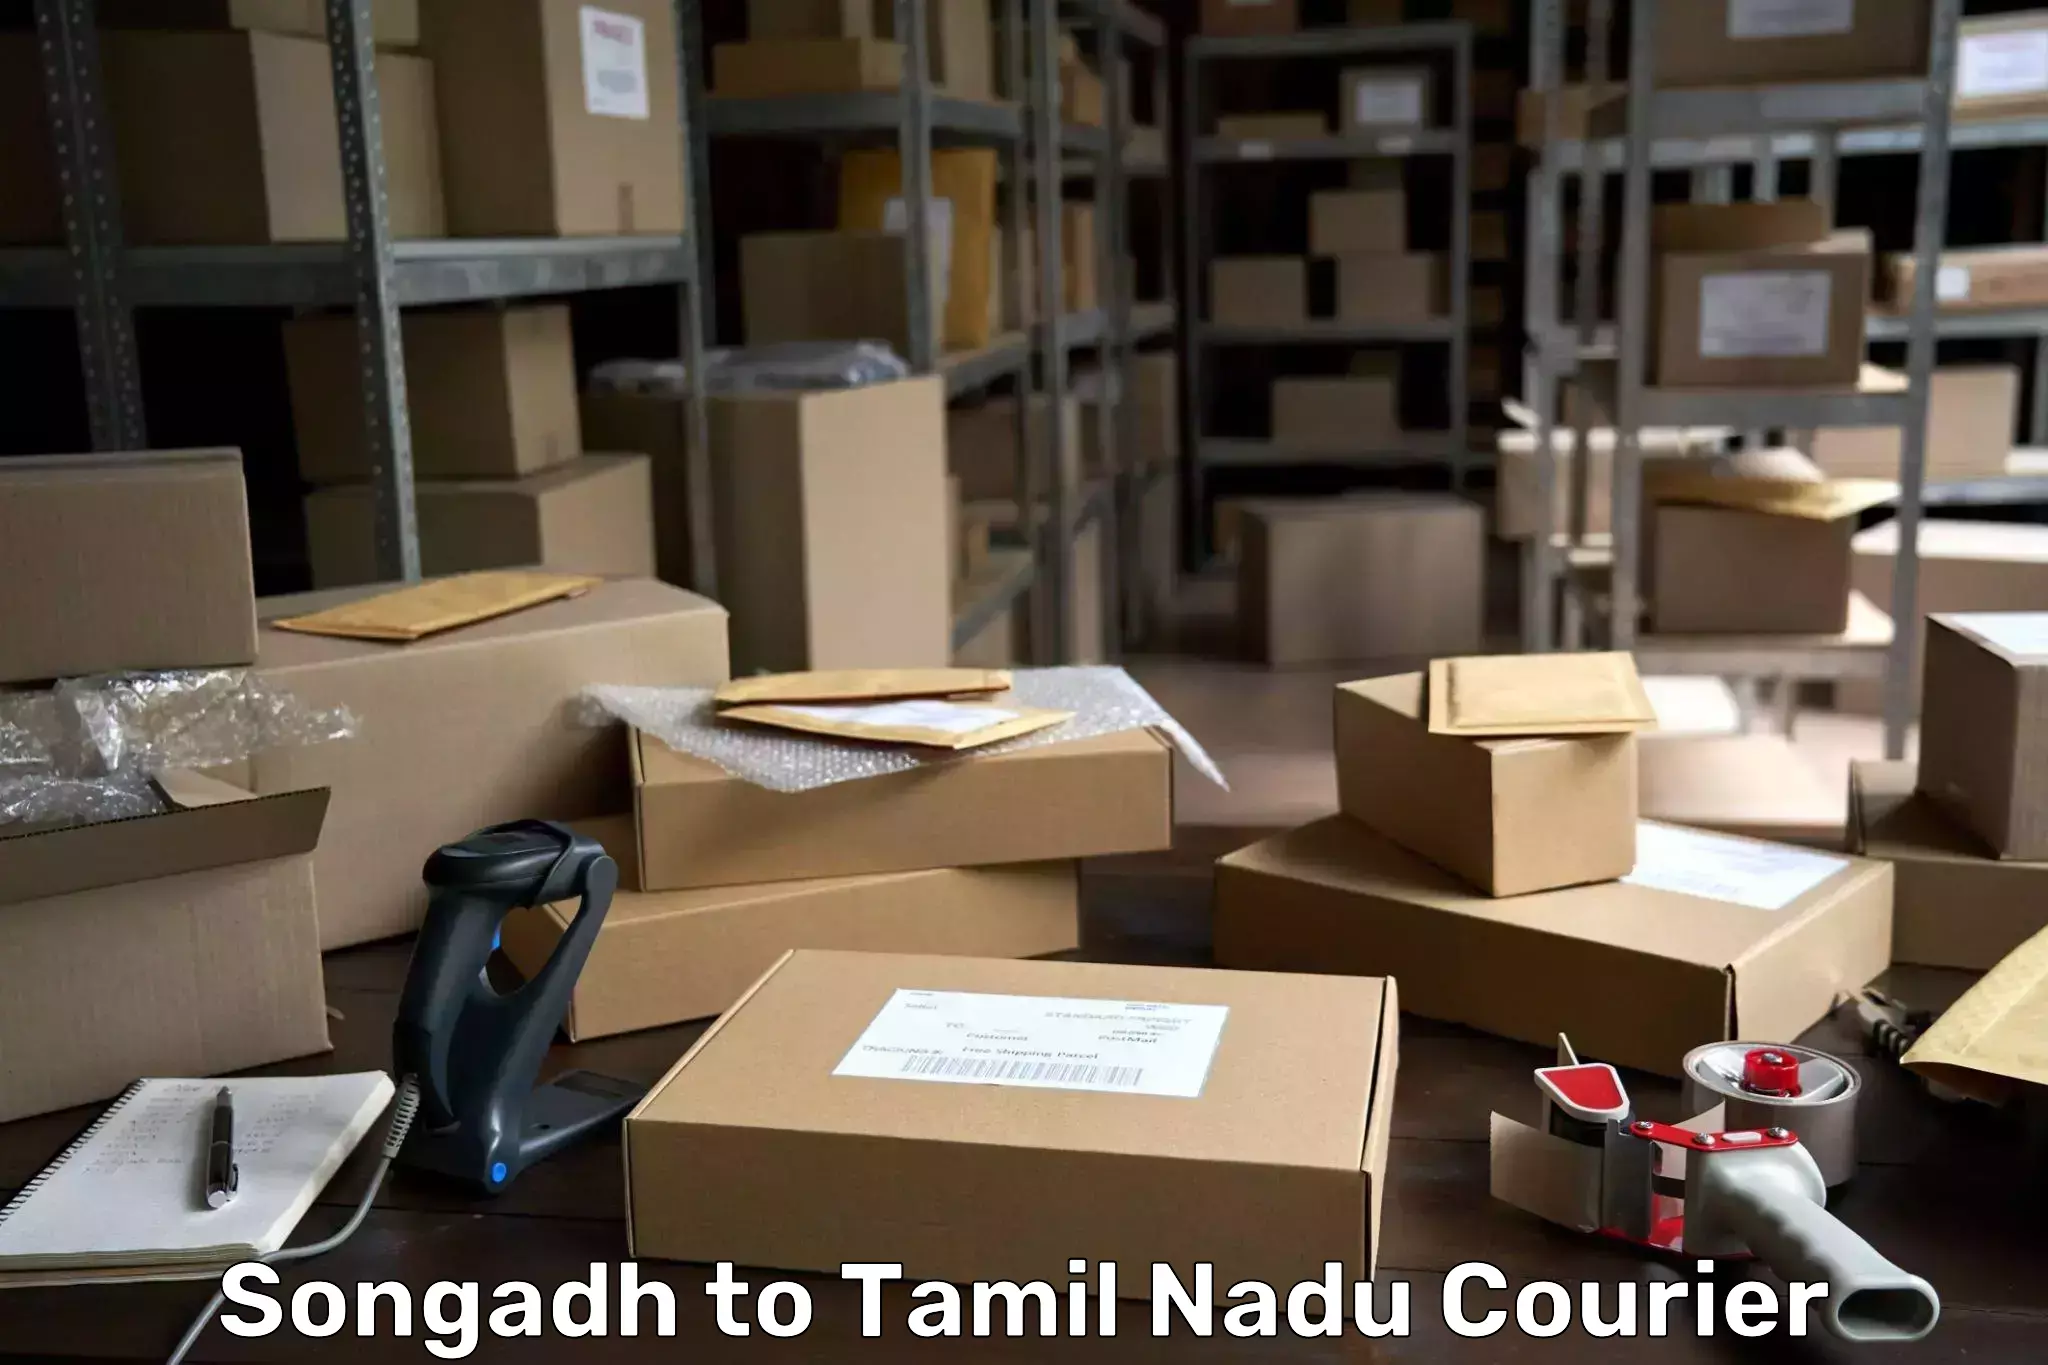 Courier service booking in Songadh to Ariyalur